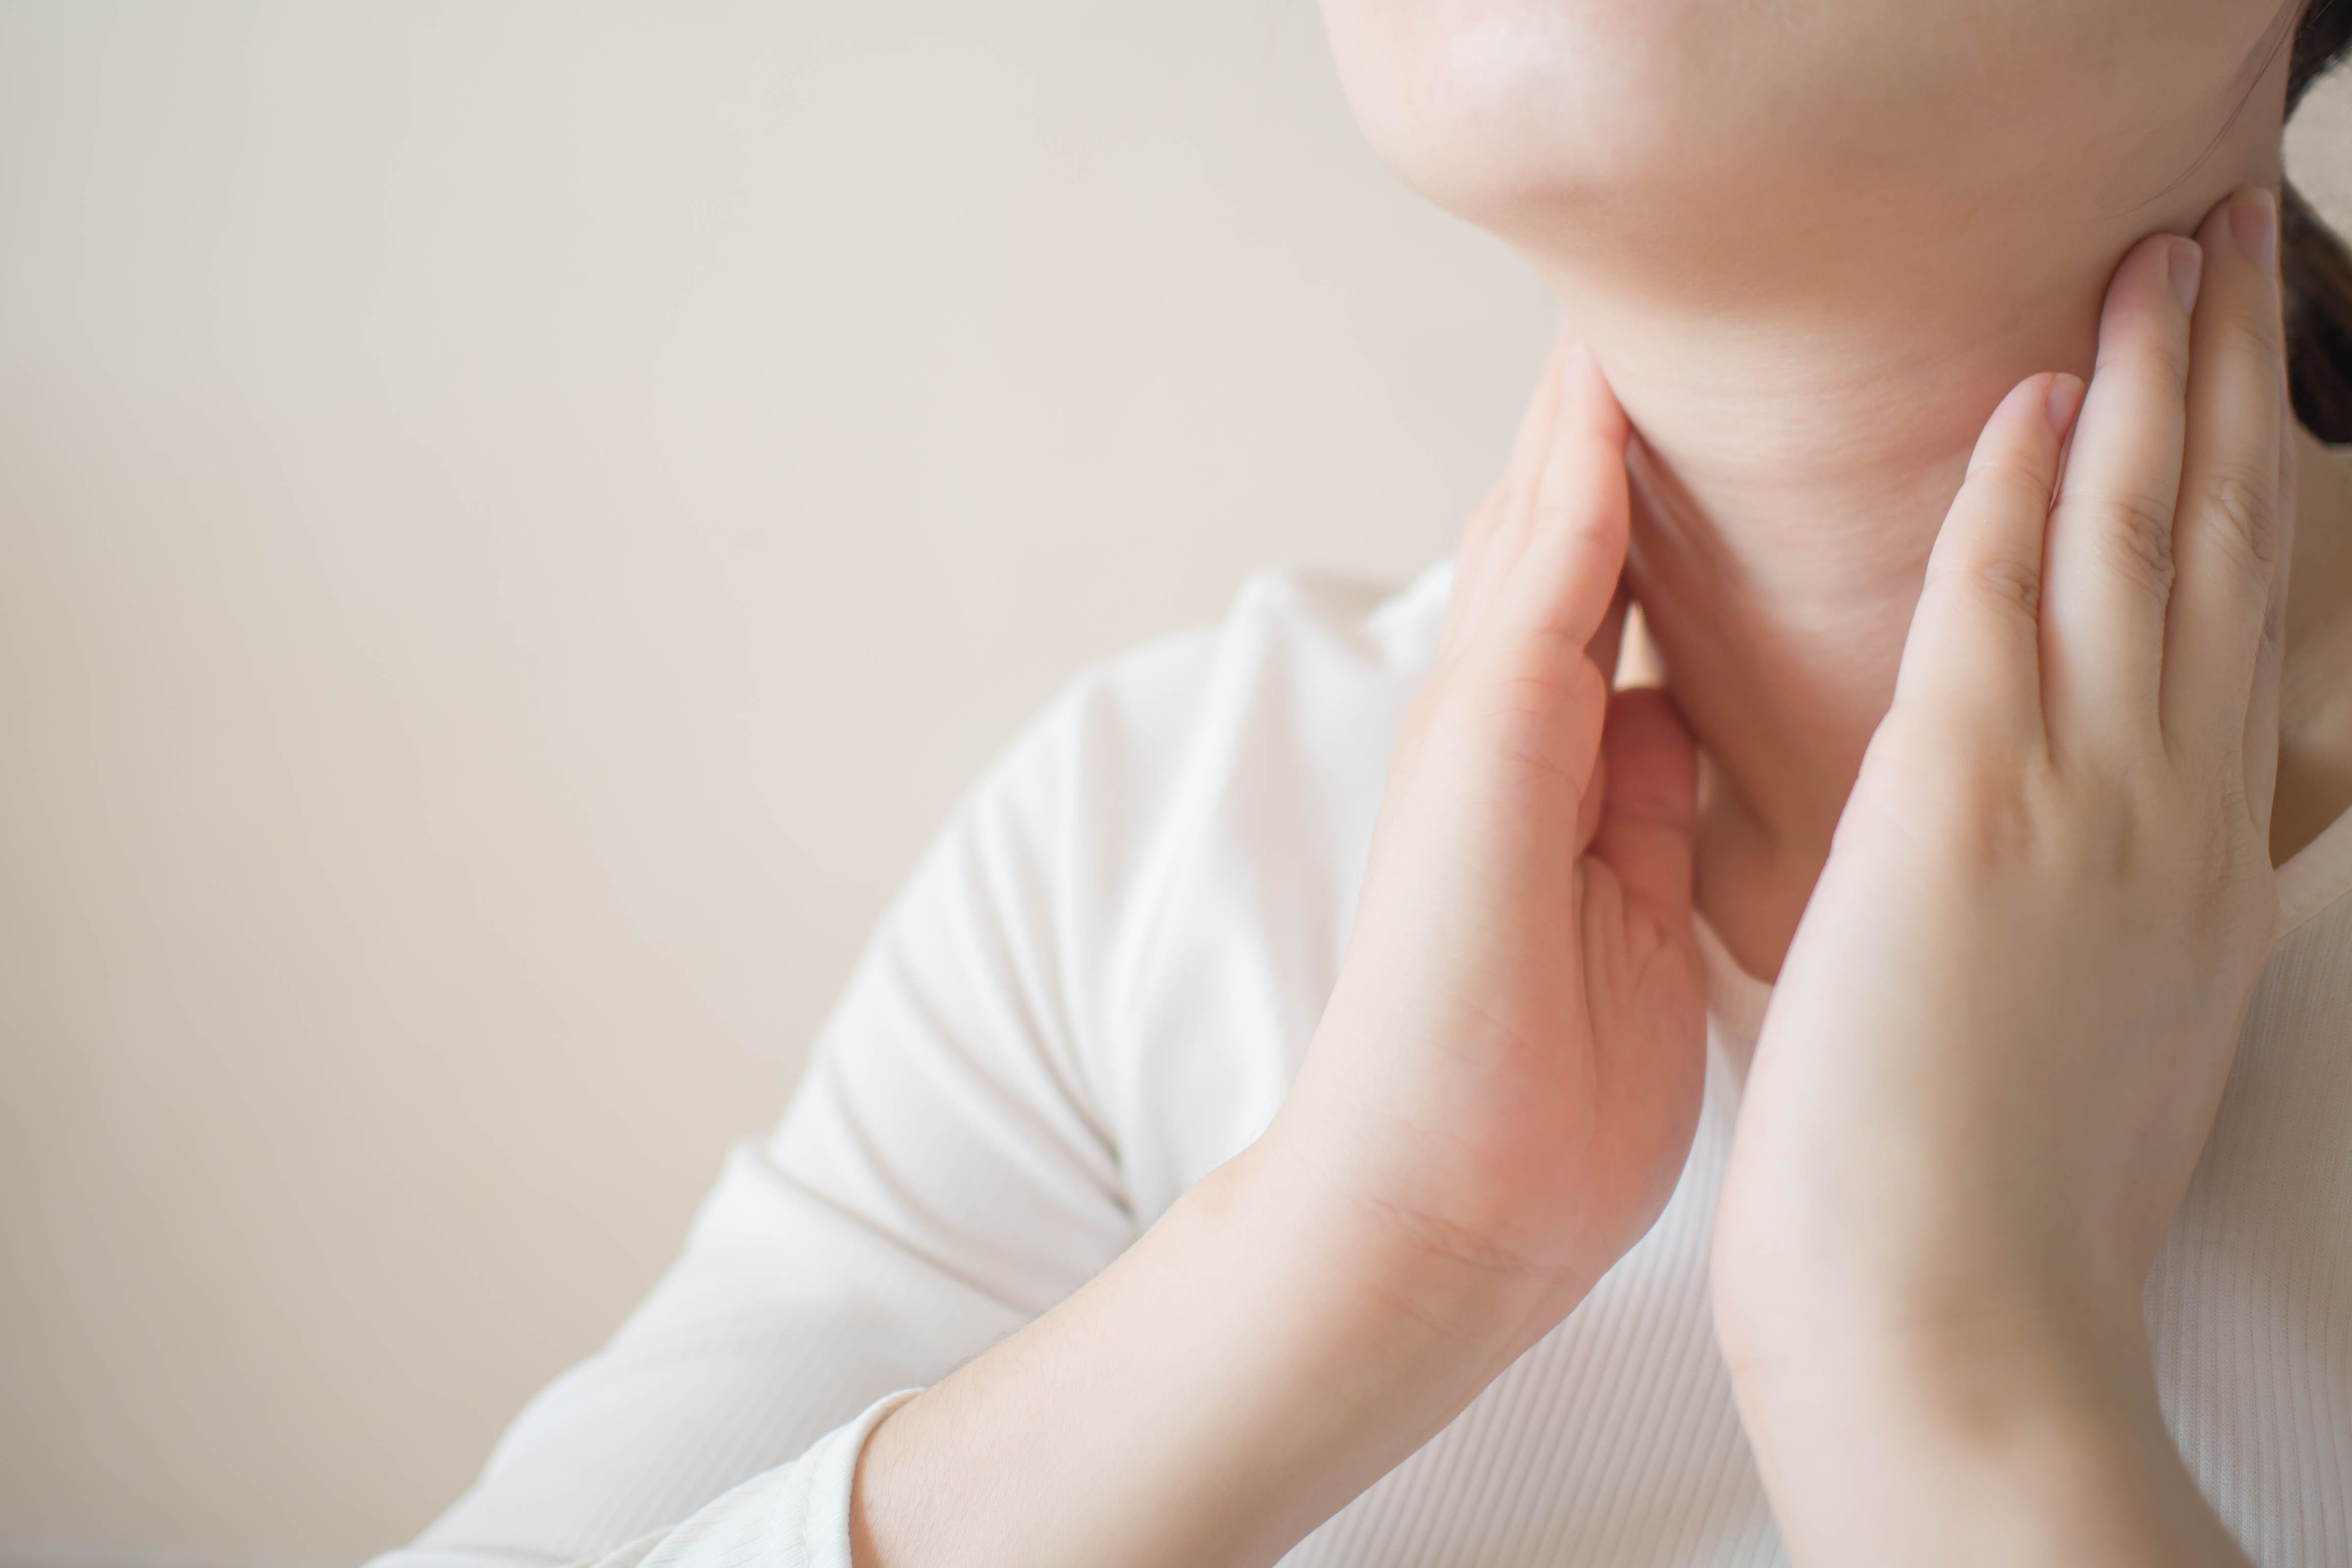 Is Mercury affecting your thyroid and hormones?